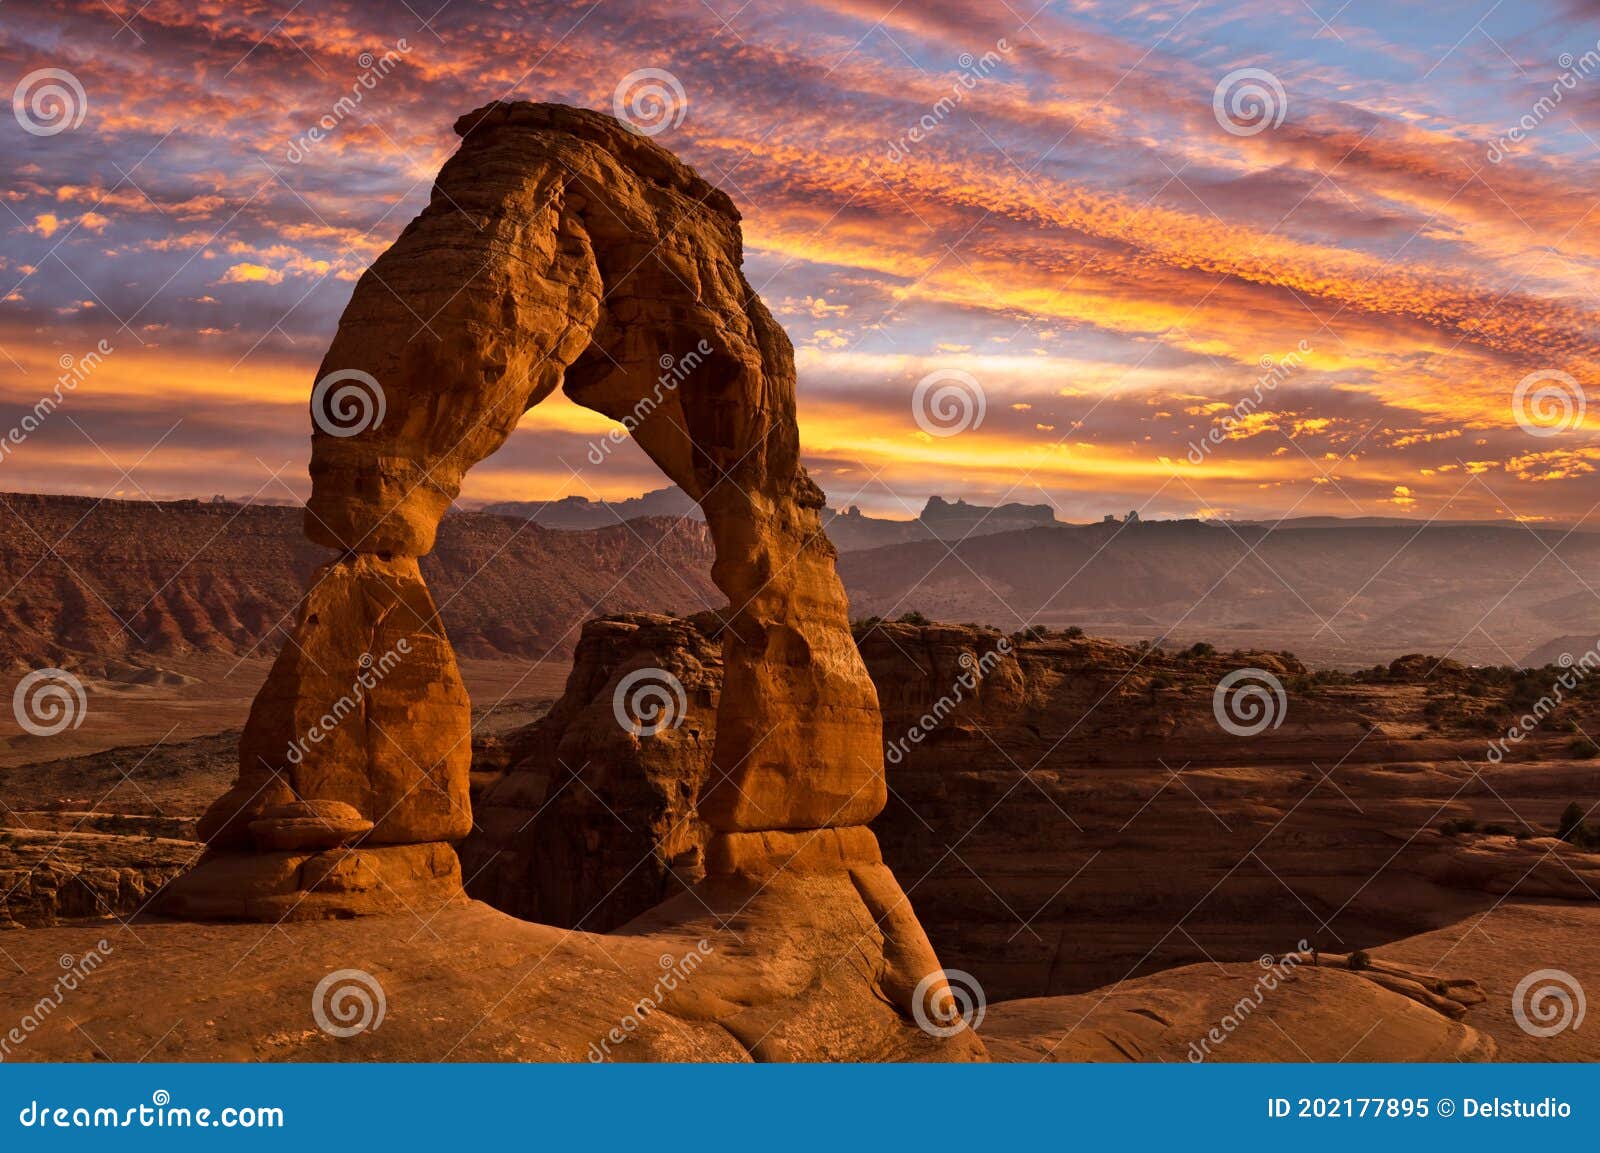 delicate arch at sunset in arches national park, utah united states